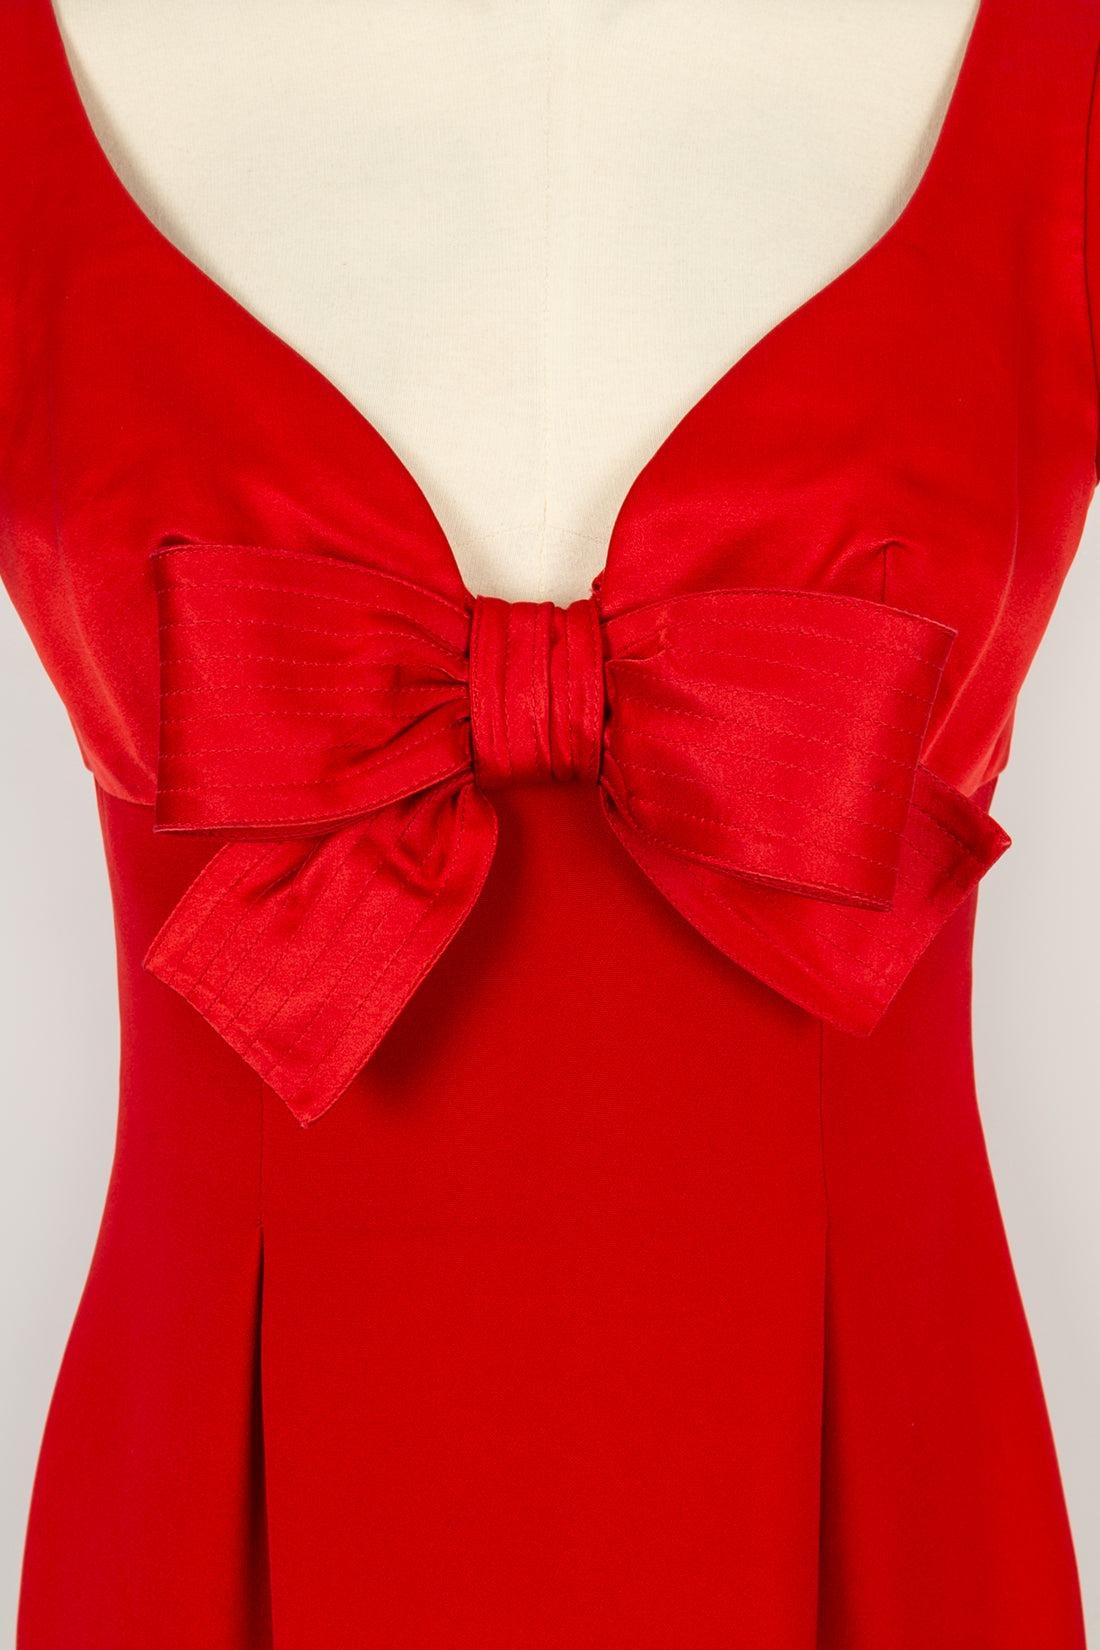 Christian Lacroix Haute Couture Dress in Red Silk with Silk Lining, 1995 For Sale 1